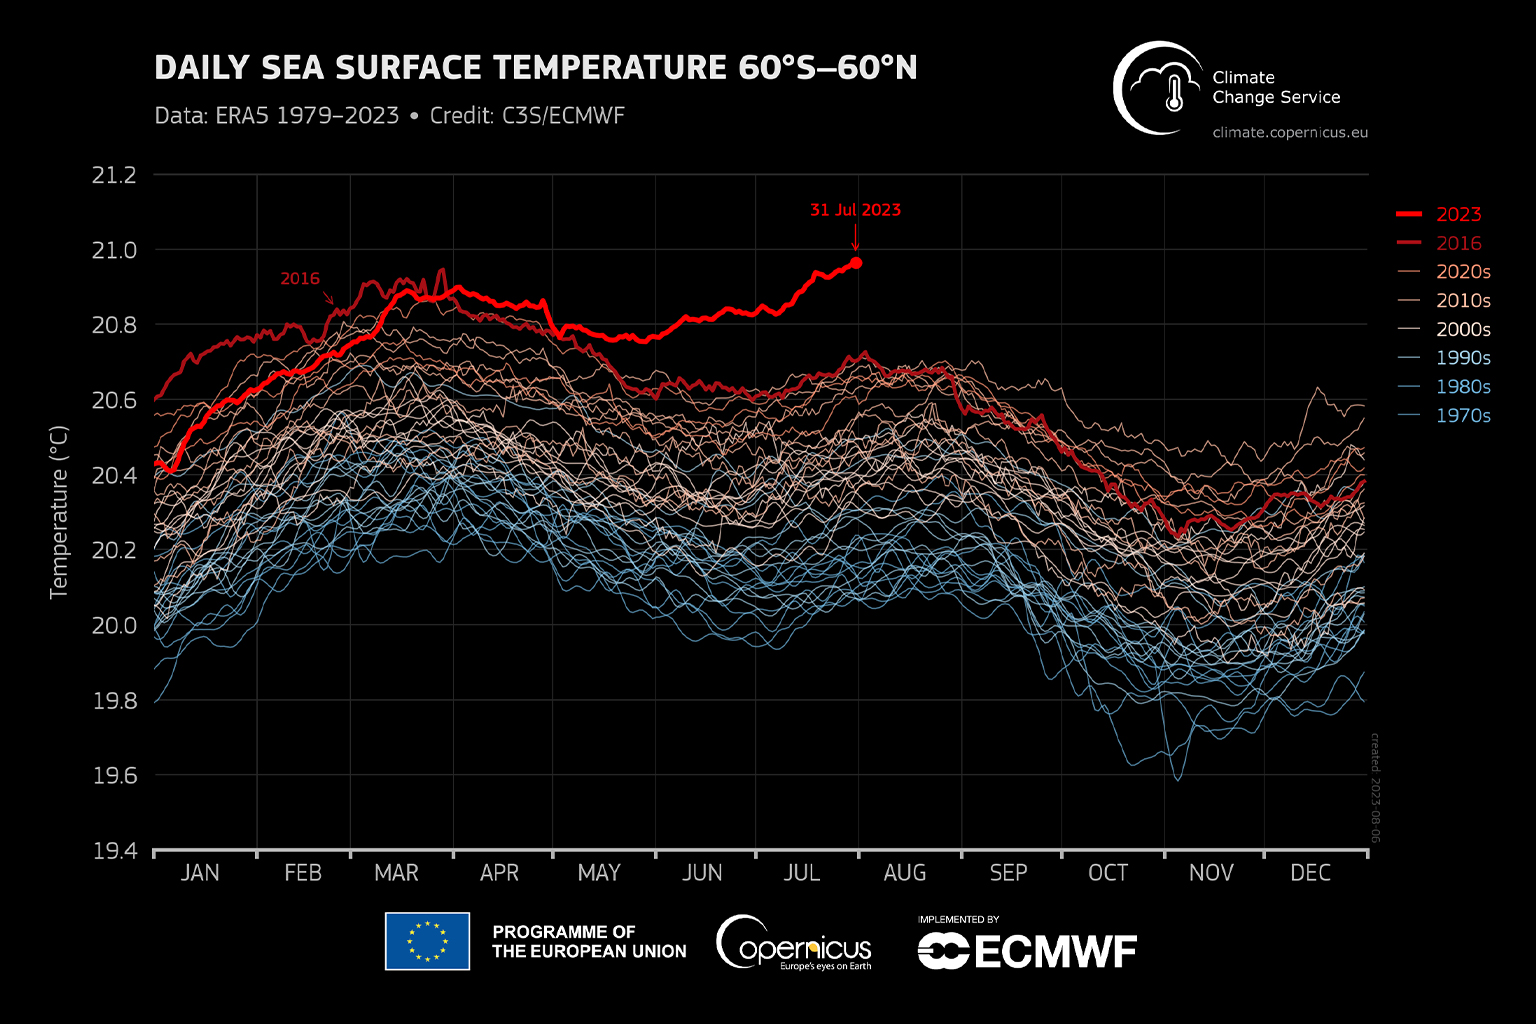 Evolution of the daily global sea surface temperature from Jan. 